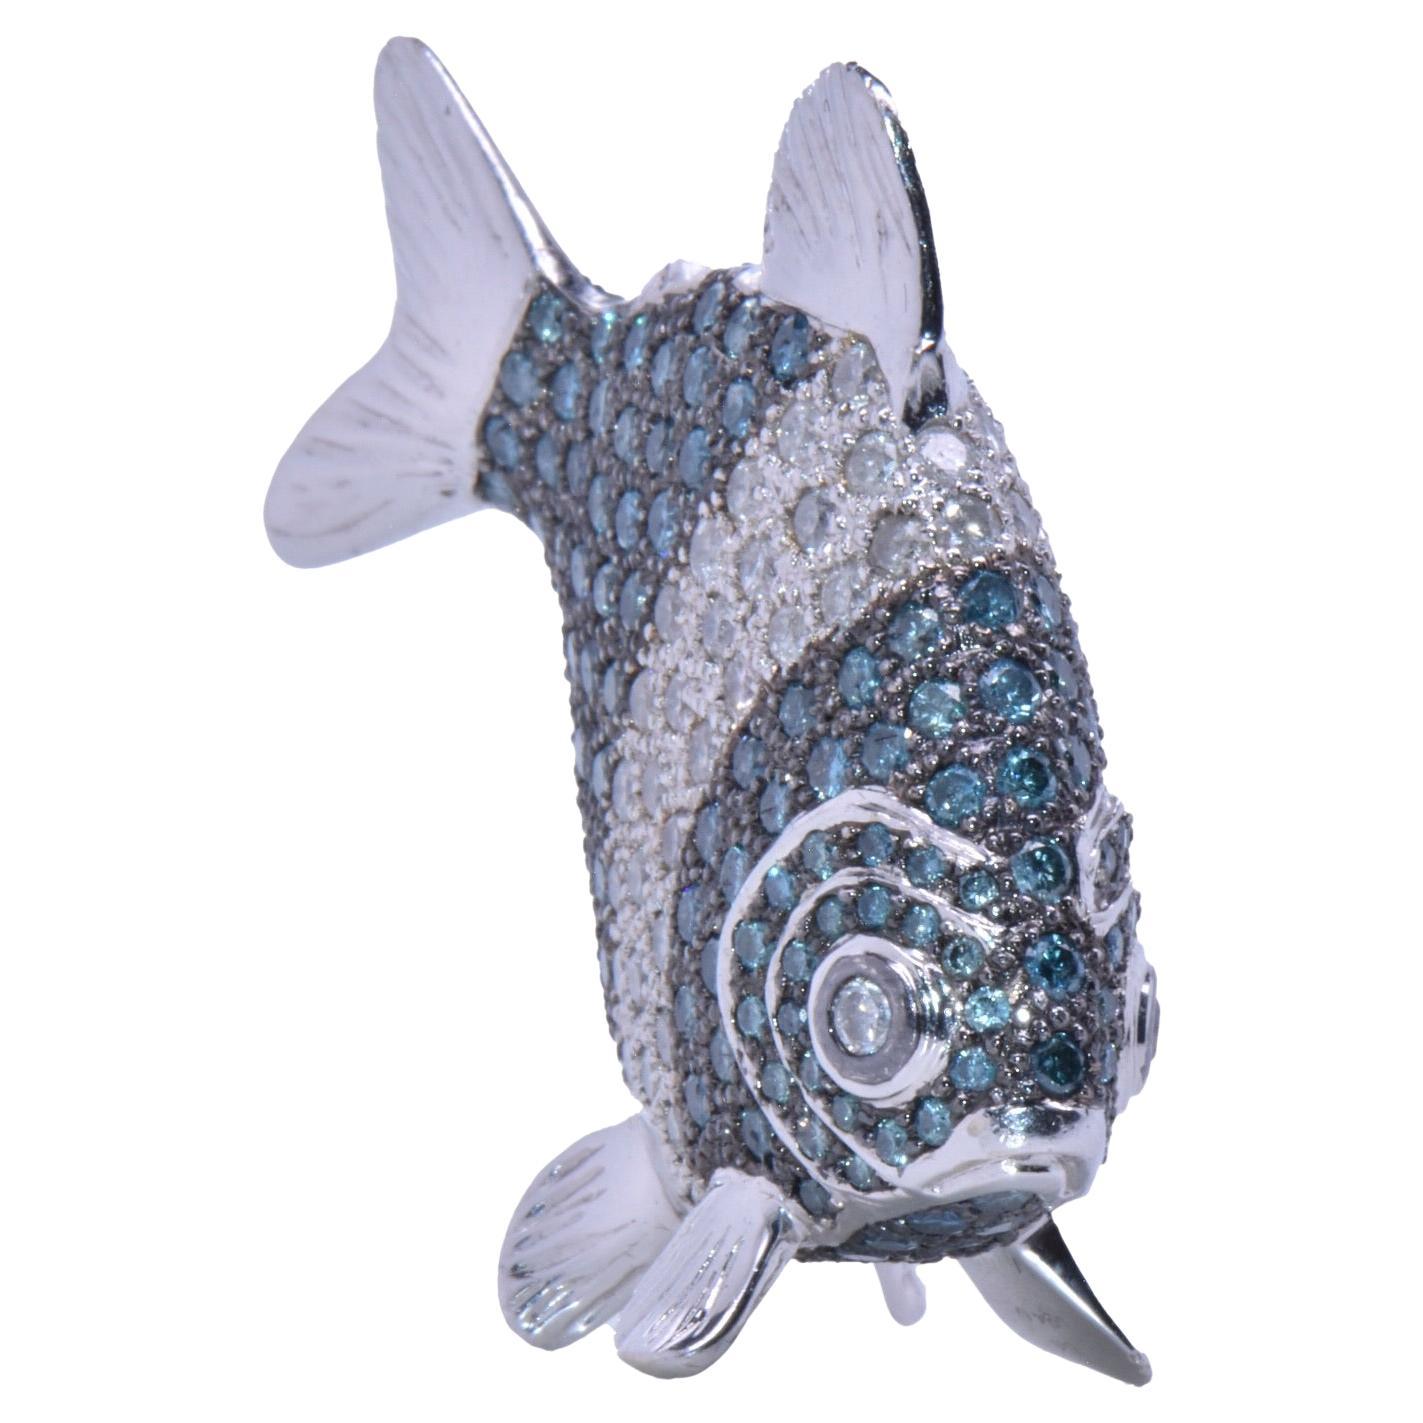 18k White Gold Fish Figurine with 9.20 Carats of White and Blue Diamonds